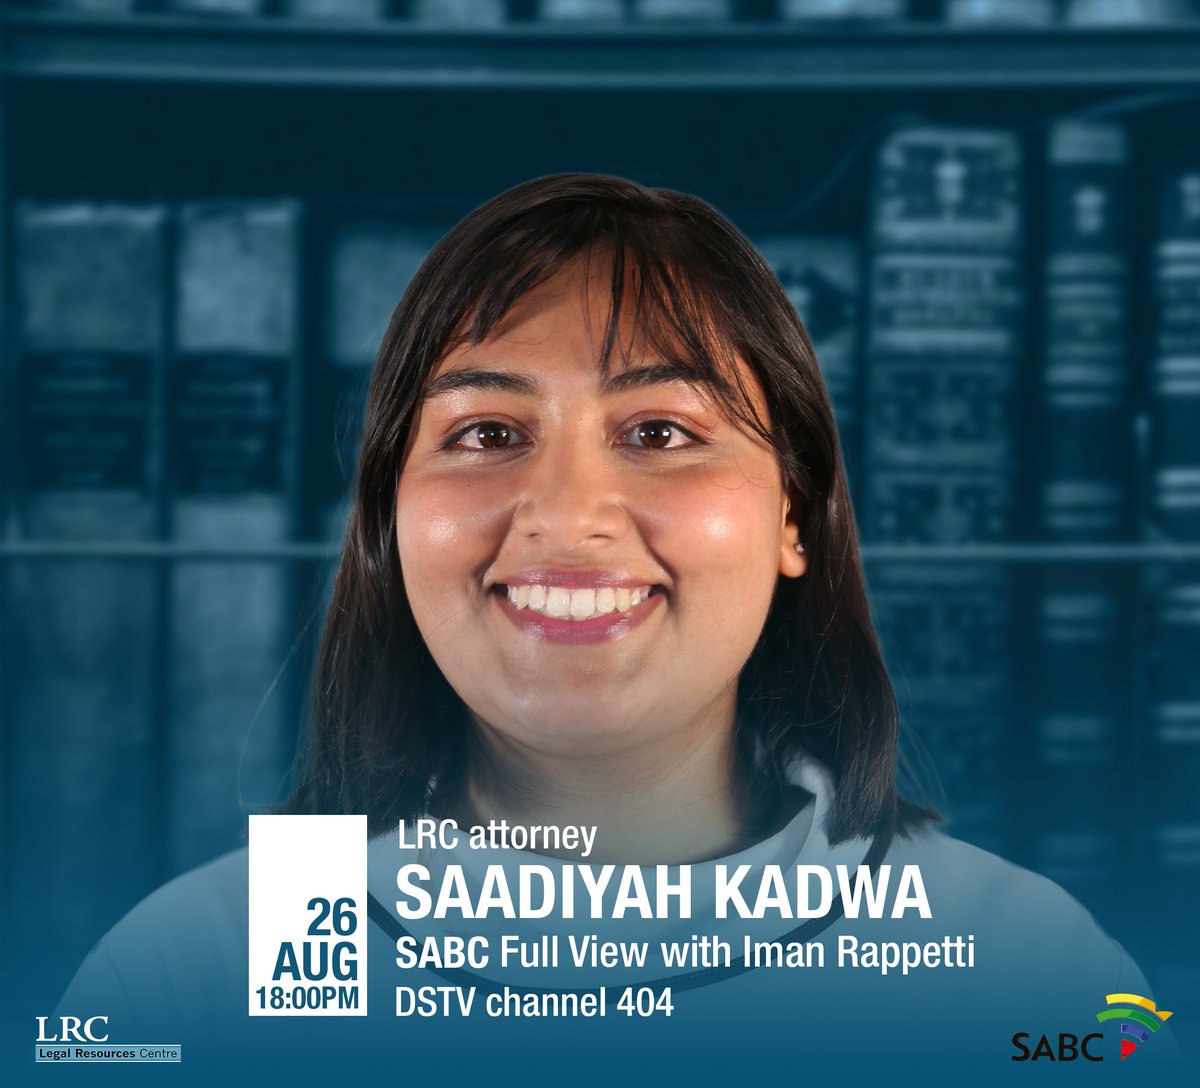 Tune in to @SABCFullView this evening where LRC attorney Saadiyah Kadwa will discuss the recent Supreme Court of Appeal dismissal of the Ingonyama Trust Board's application for leave to appeal, with @imanrappetti